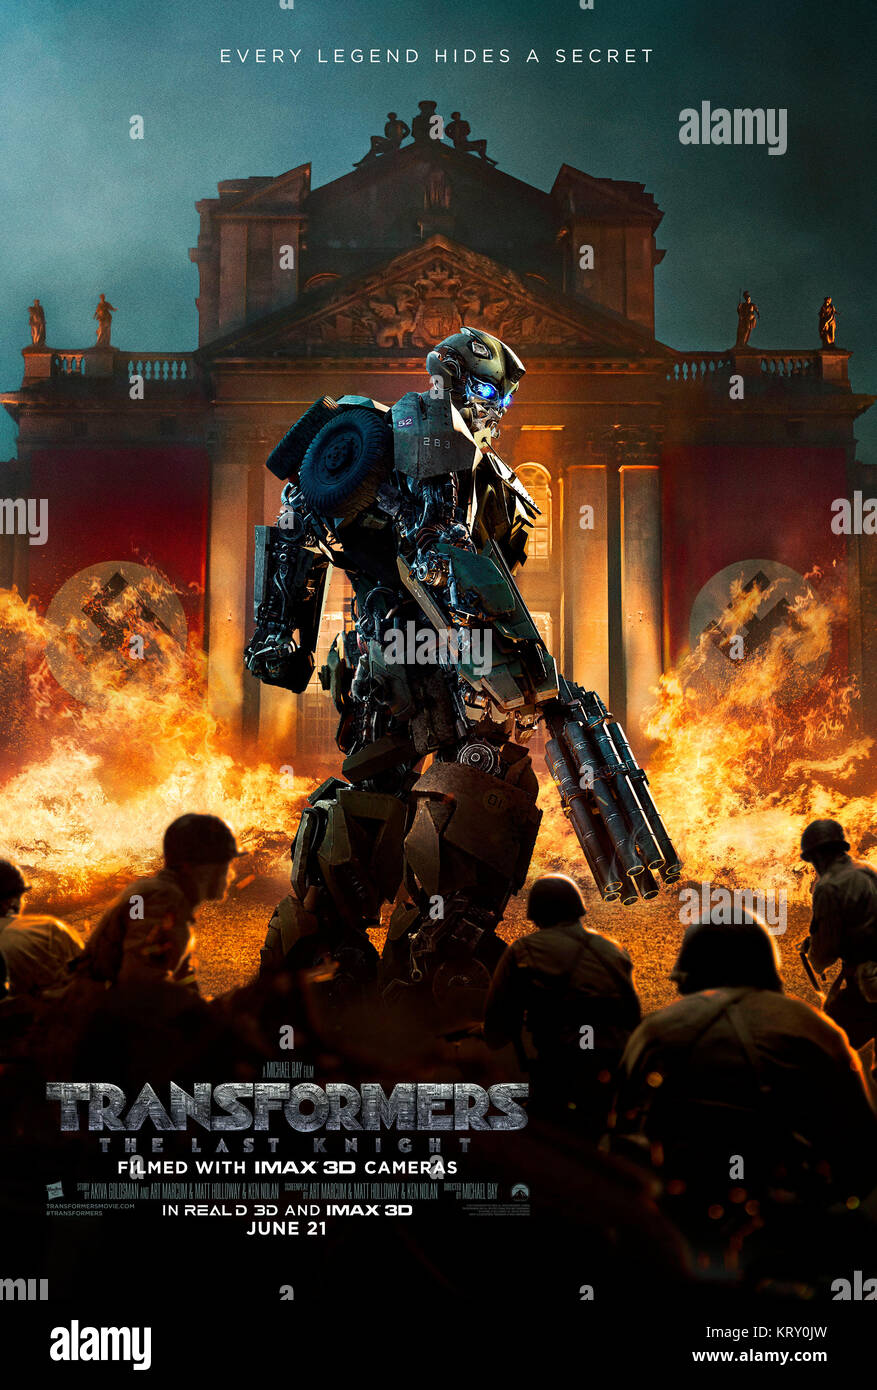 RELEASE DATE: June 21, 2017 TITLE: Transformers: The Last Knight STUDIO: Paramount Pictures DIRECTOR: Michael Bay PLOT: Autobots and Decepticons are at war, with humans on the sidelines. Optimus Prime is gone. The key to saving our future lies buried in the secrets of the past, in the hidden history of Transformers on Earth. STARRING: Poster Art. (Credit Image: © Paramount Pictures/Entertainment Pictures) Stock Photo